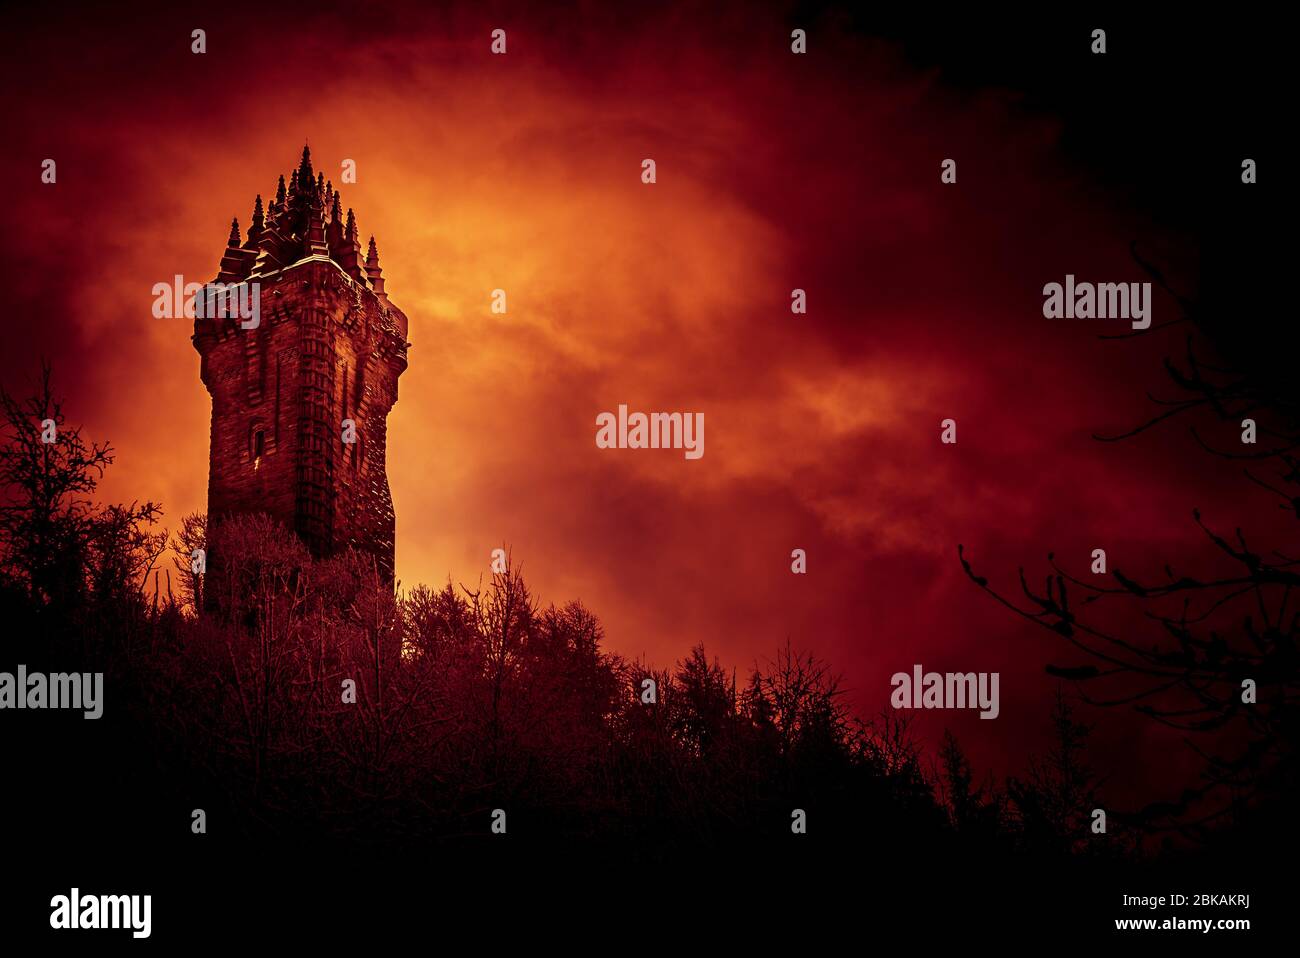 Saurons tower, Barad Dur, in Mordor Stock Photo